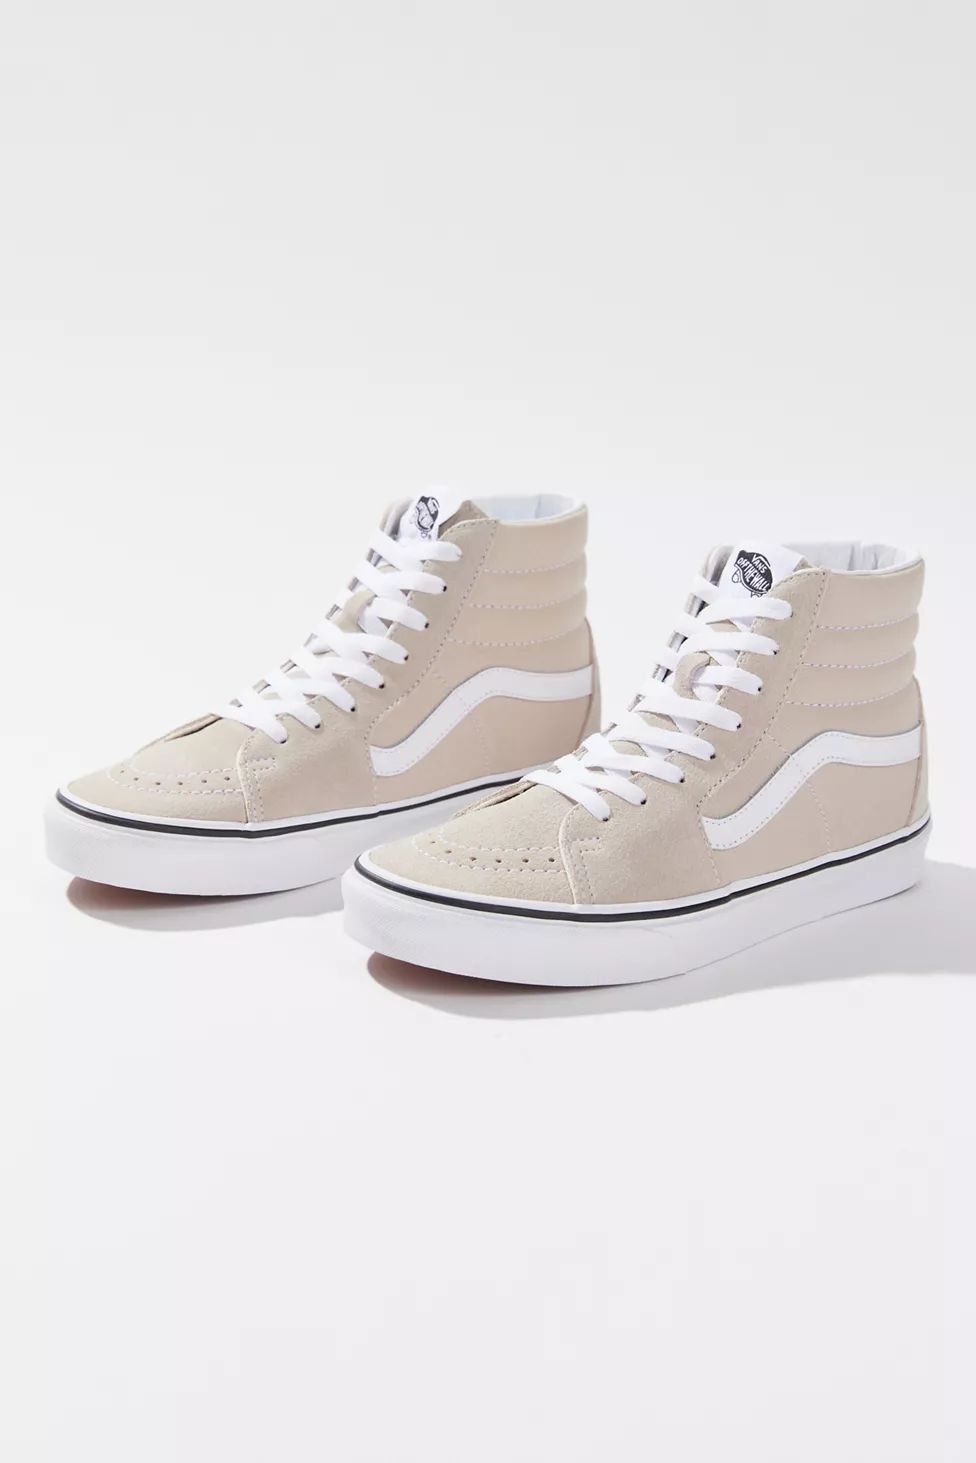 Vans Sk8-Hi High Top Sneaker | Urban Outfitters (US and RoW)